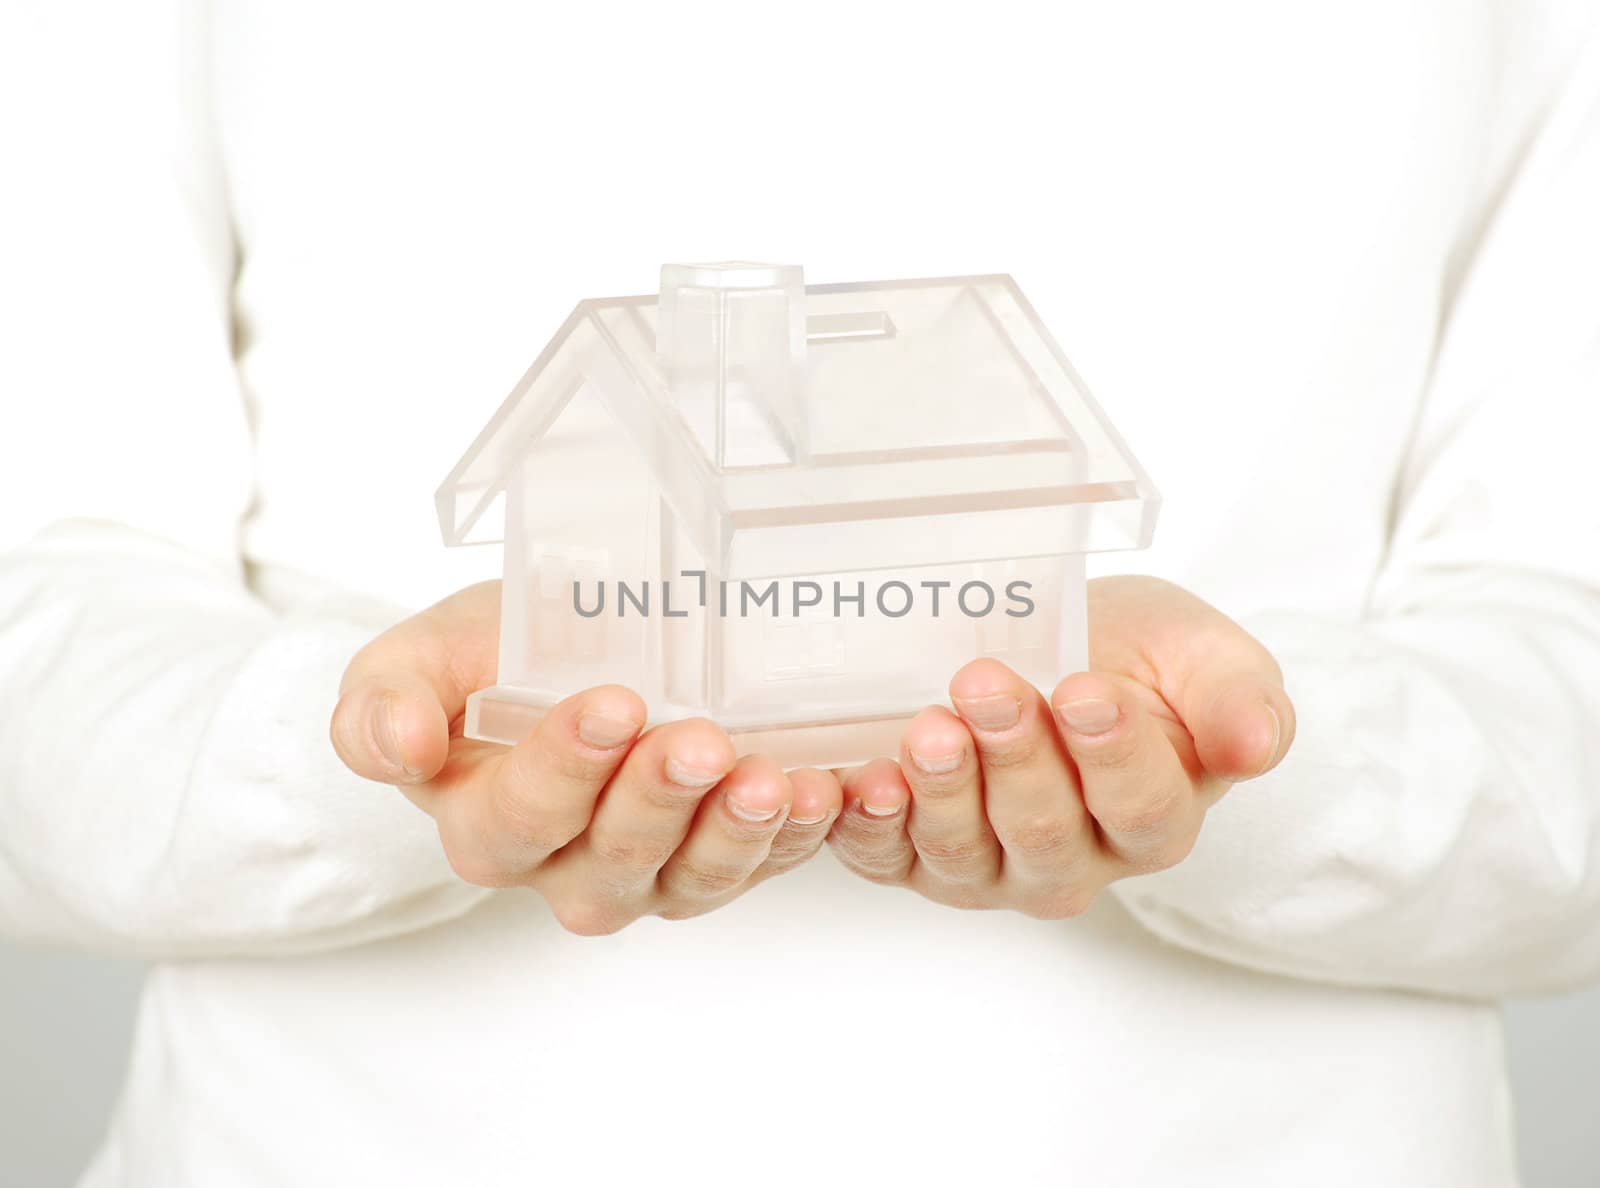 The house in human hands on white